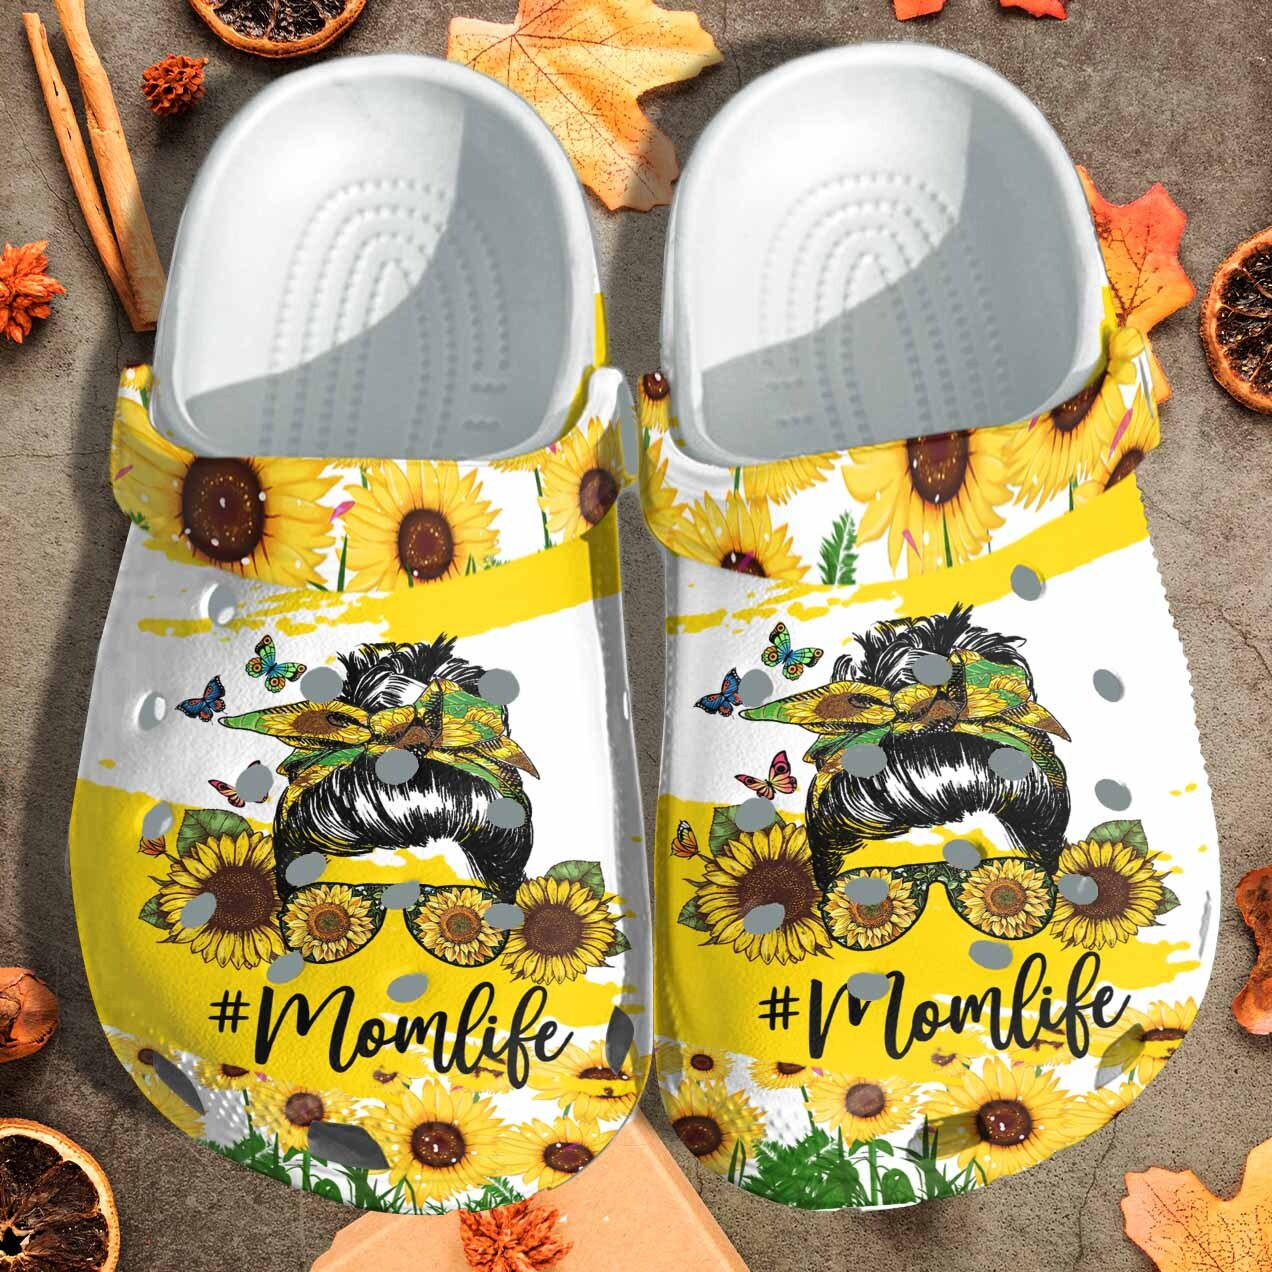 Mom Life Sunflower Crocs Clog Shoes Gift For Wife - Cool Mom Life Custom Crocs Clog Shoes Gift Mothers Day